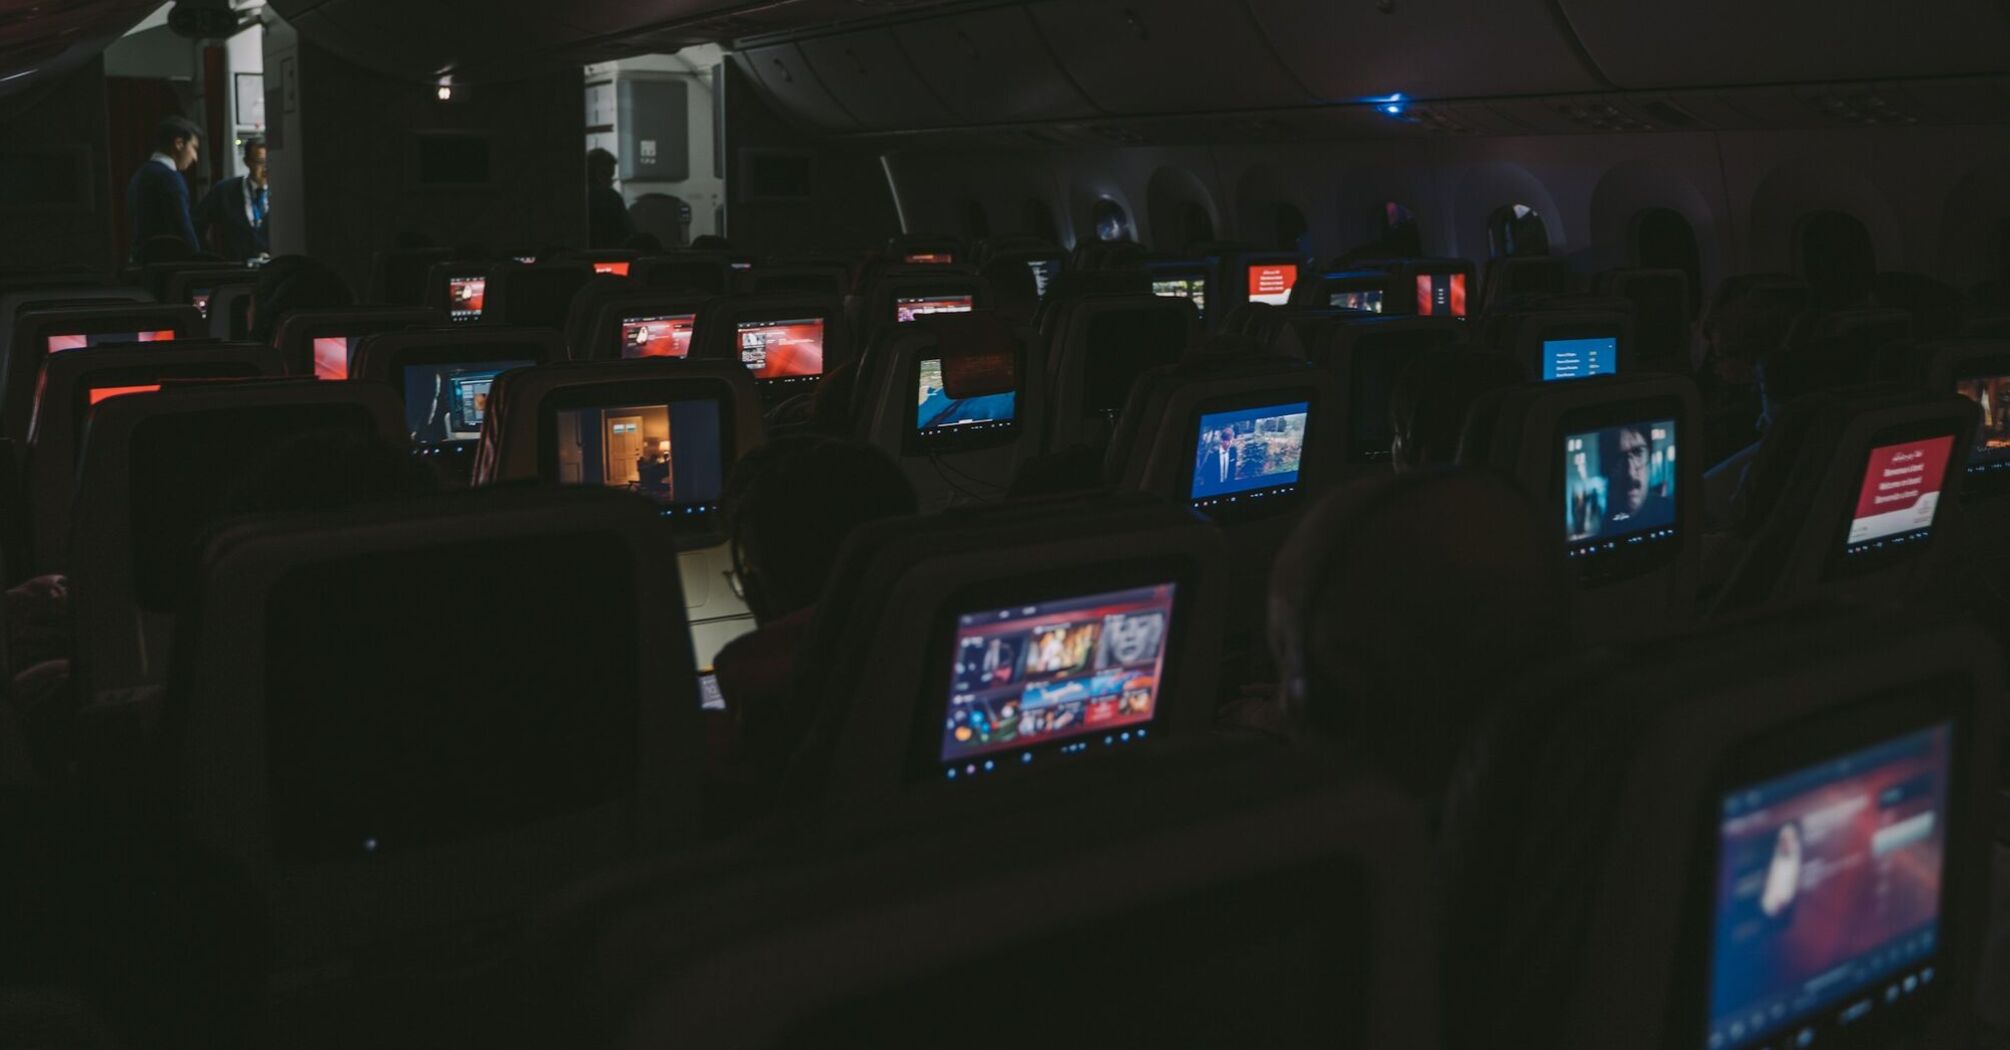 Cabin view of an airplane with seatback screens illuminated in a dimmed cabin